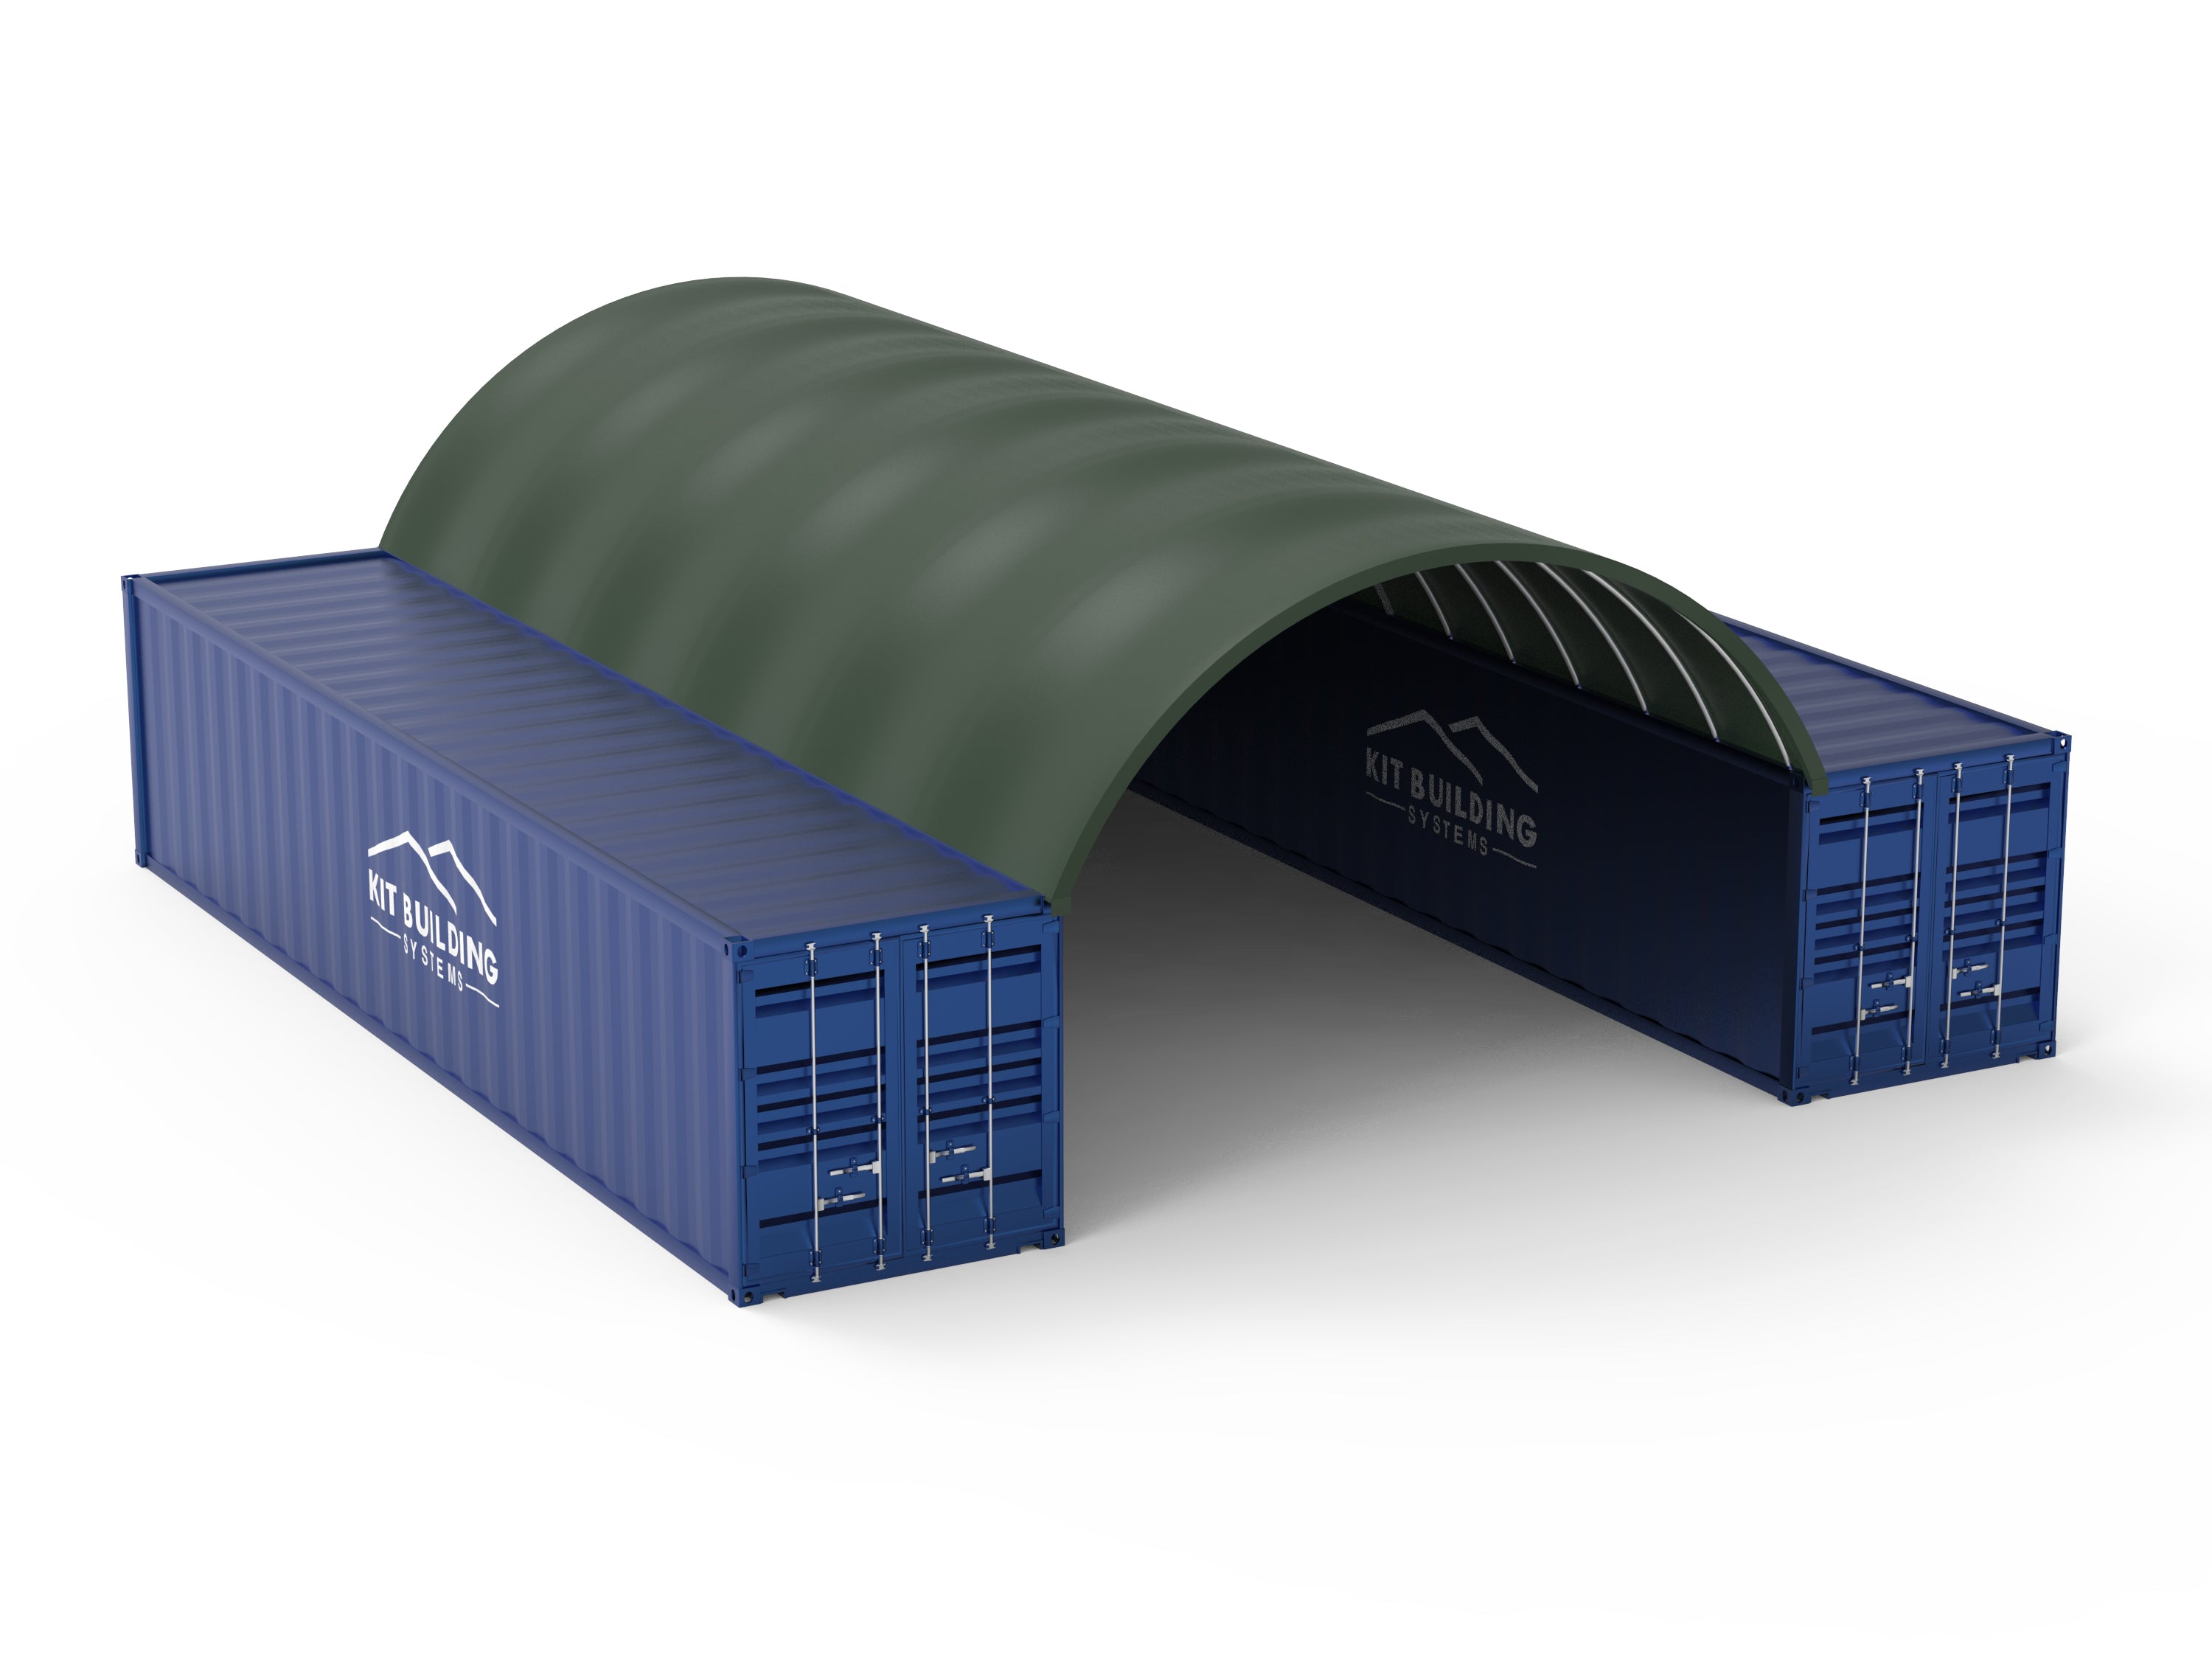 6m x 12m x 2m Container Canopy -  Open both ends – Green